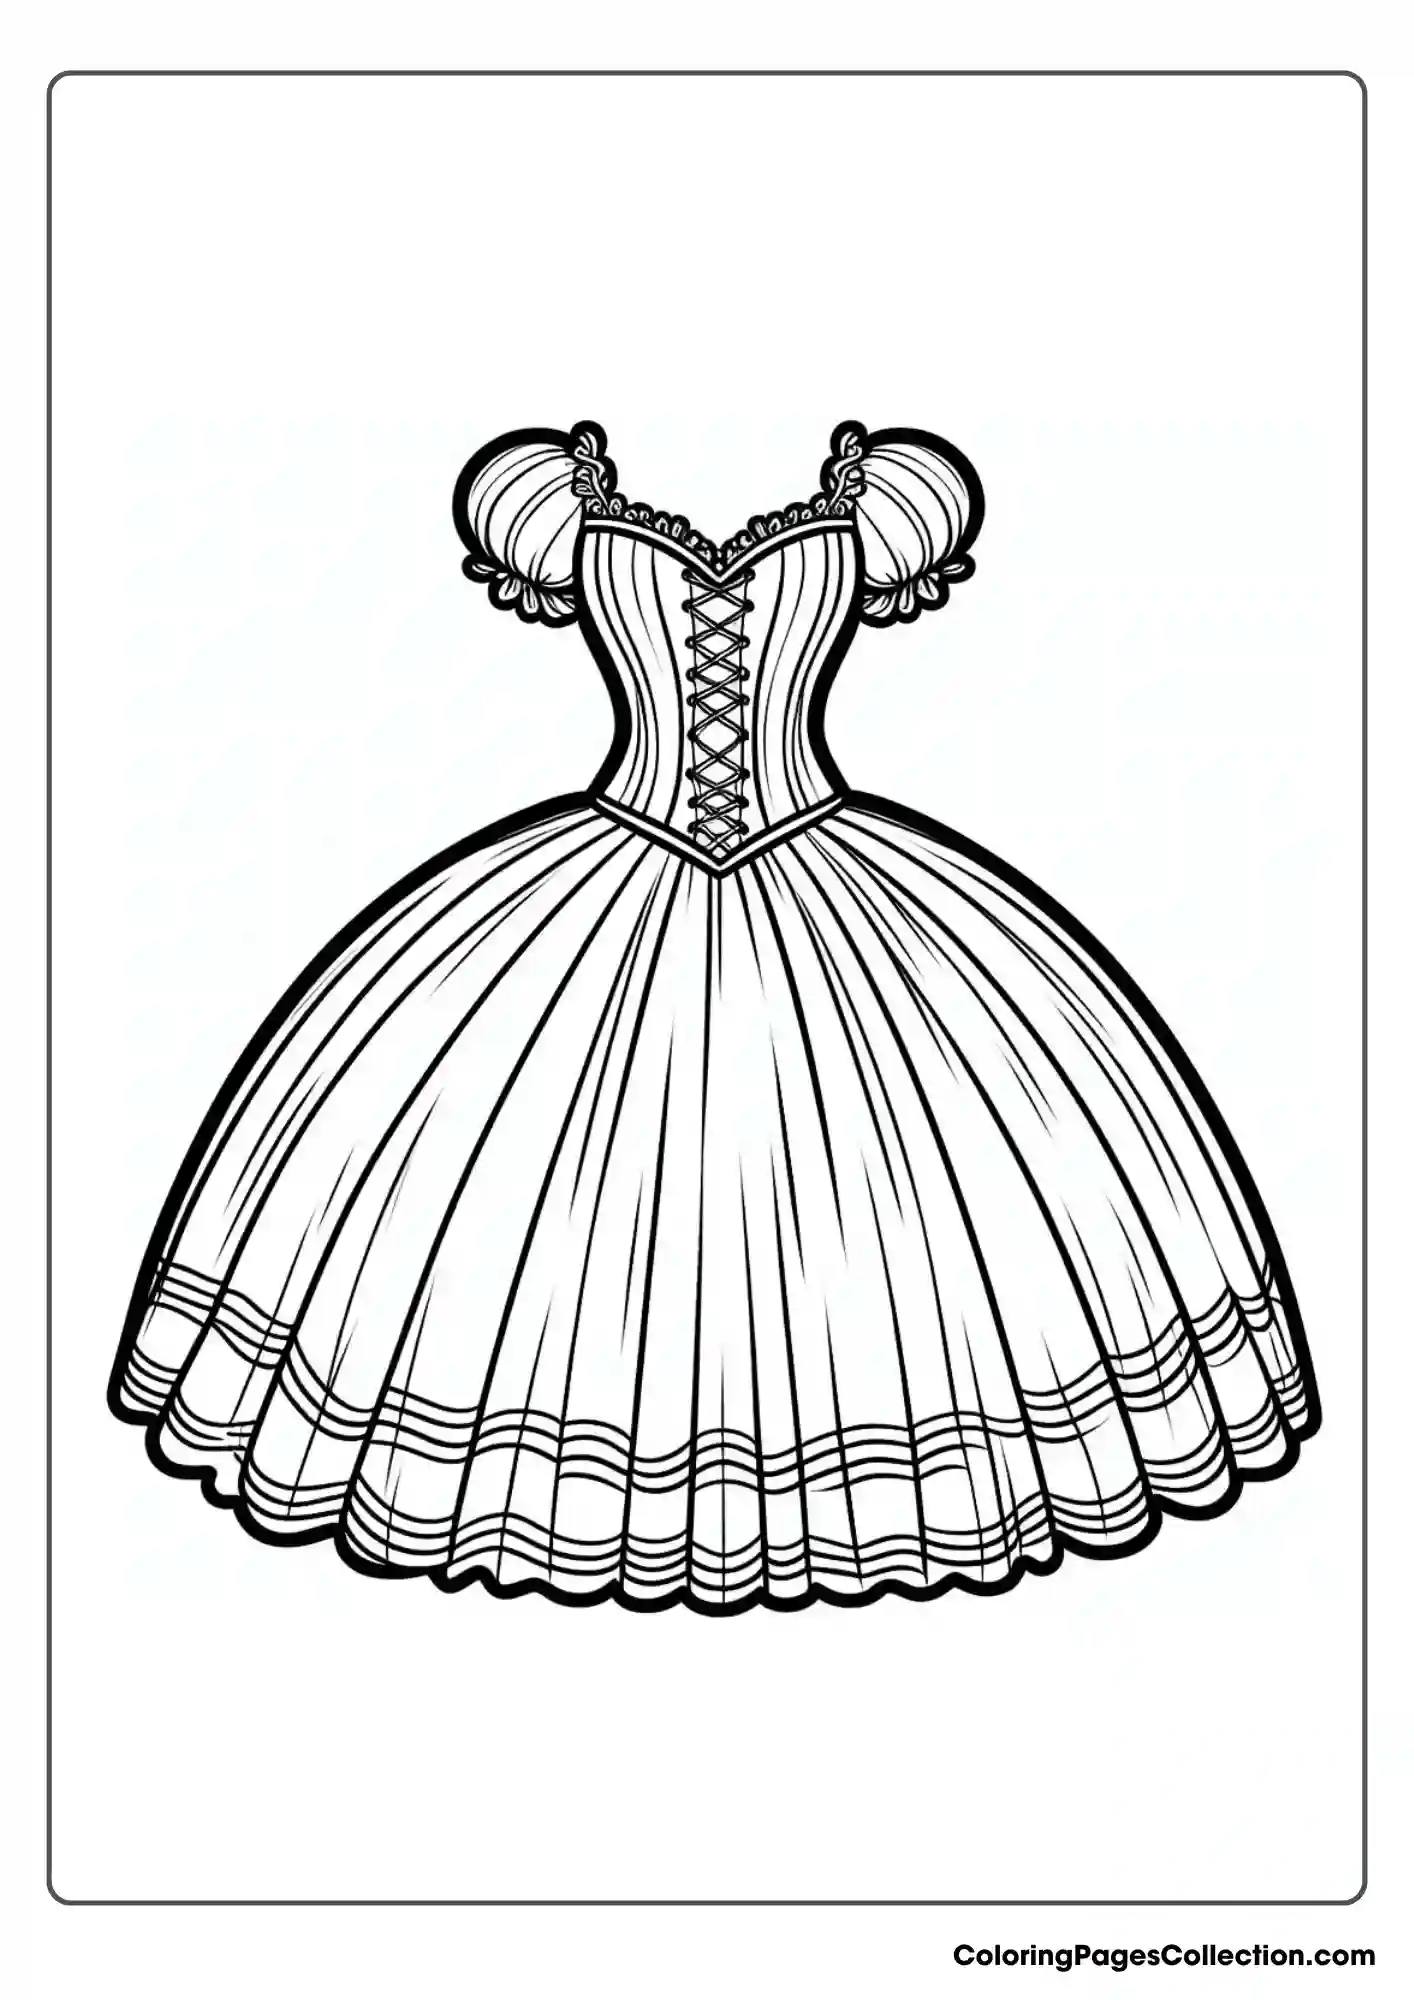 Corset-style Bodice And A Pleated Skirt Princess Dress